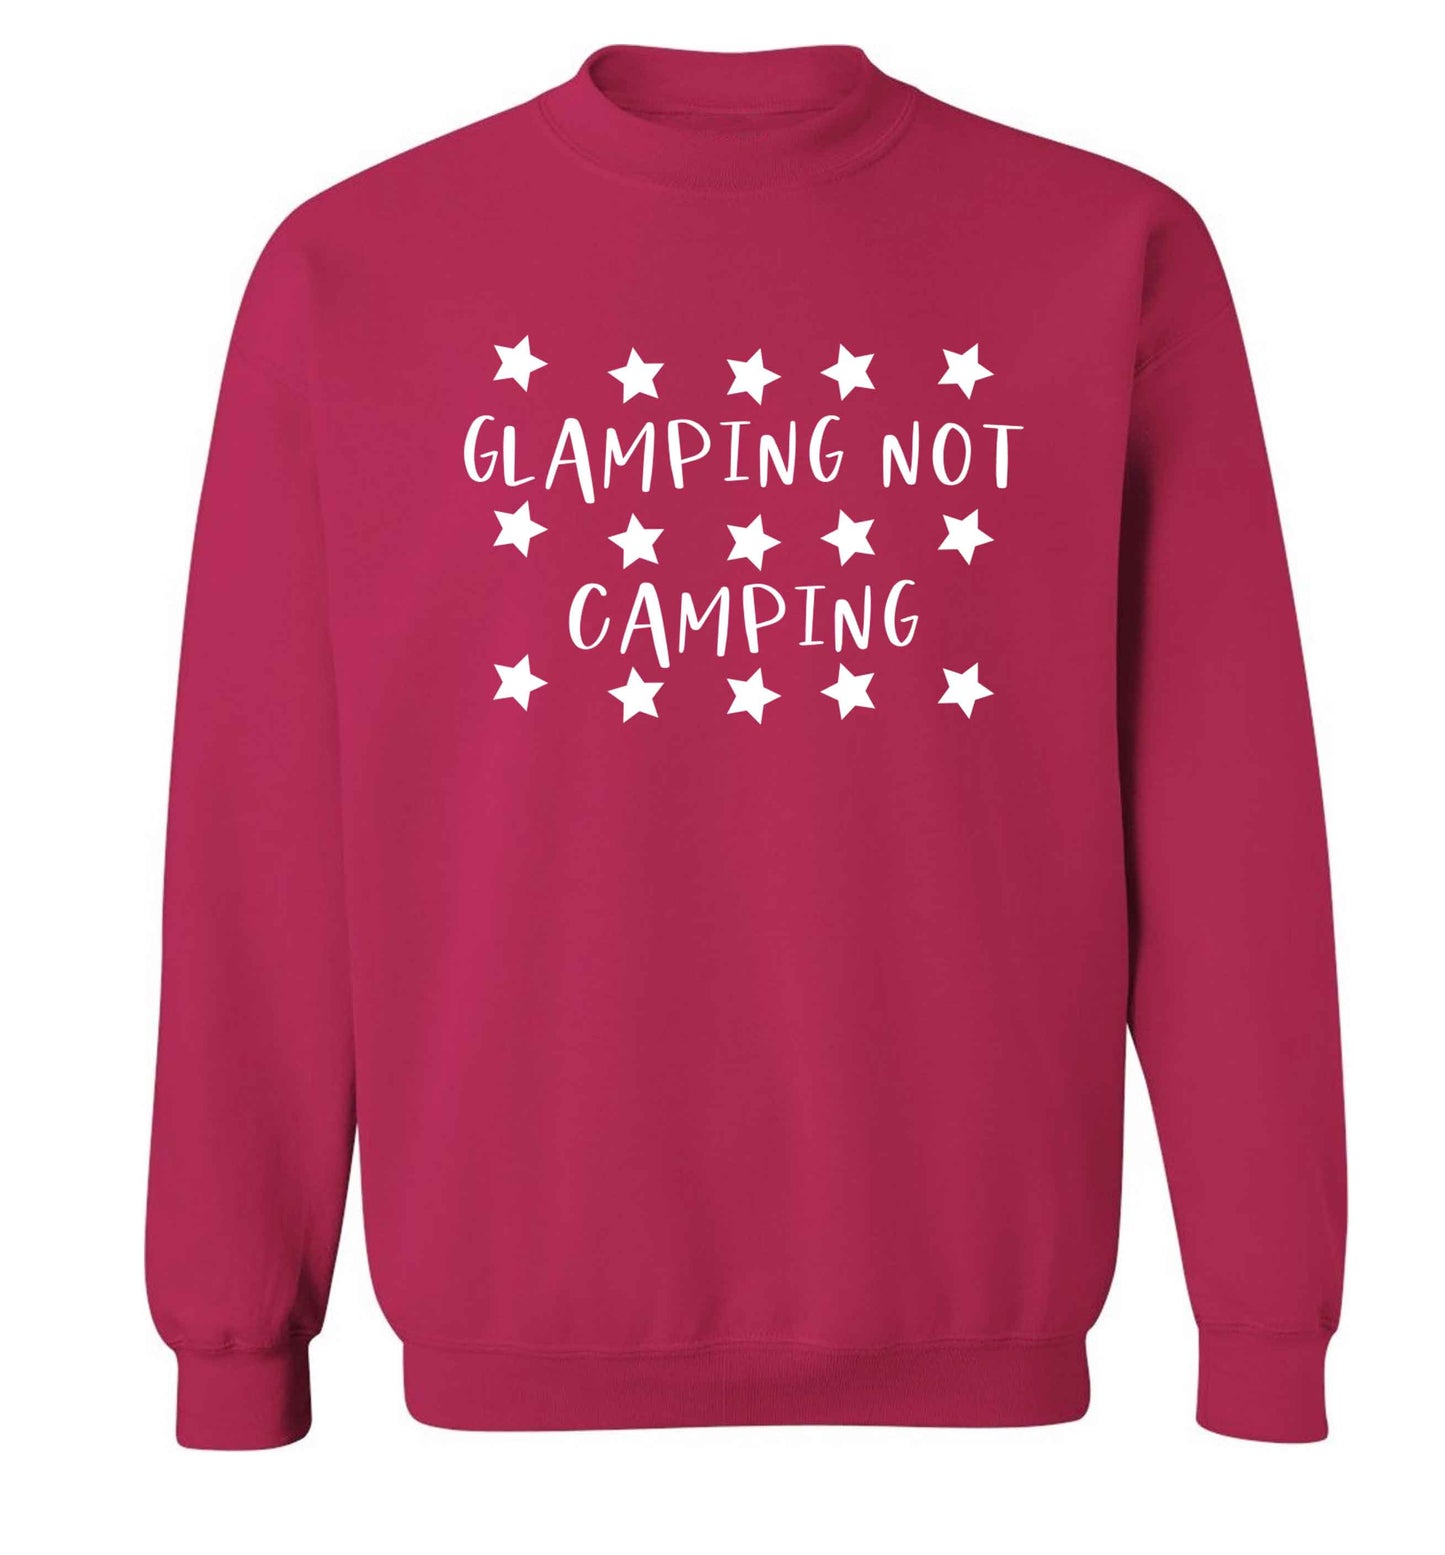 Glamping not camping Adult's unisex pink Sweater 2XL